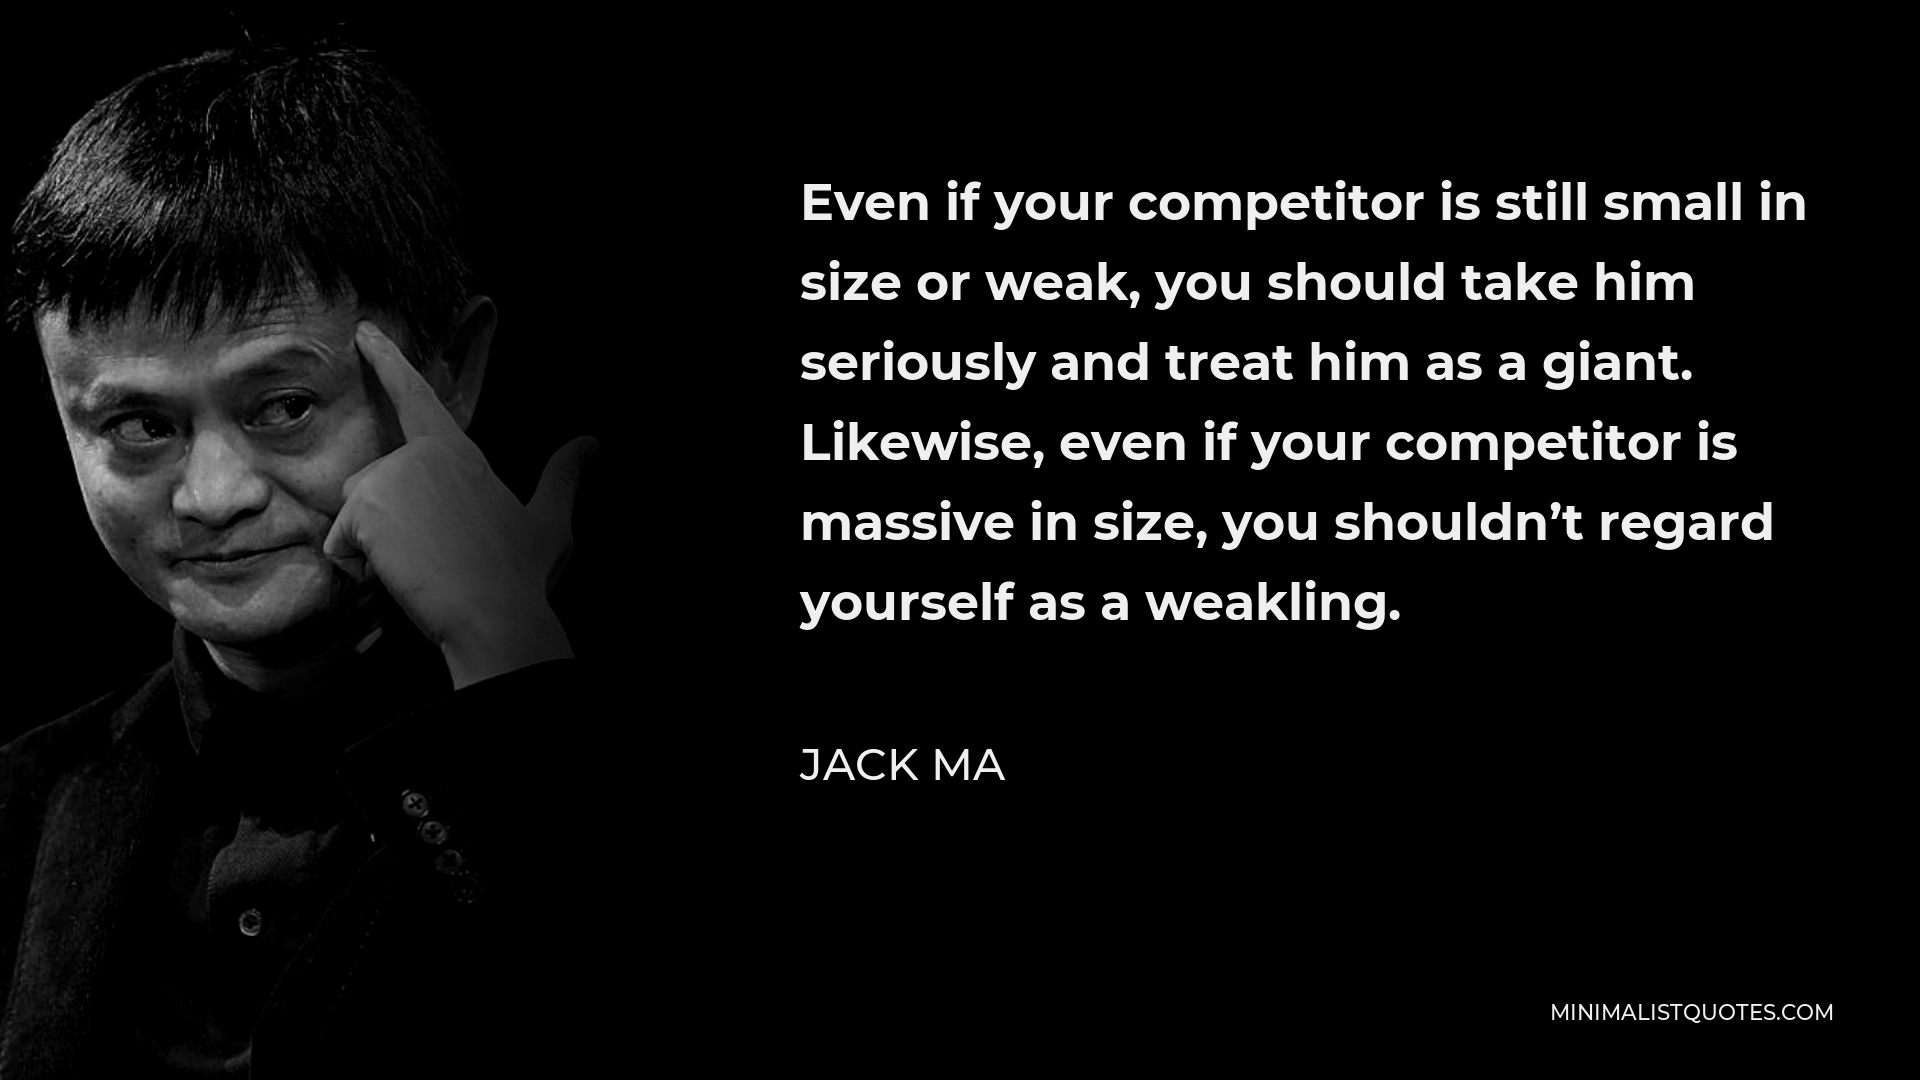 Jack Ma Quote - Even if your competitor is still small in size or weak, you should take him seriously and treat him as a giant. Likewise, even if your competitor is massive in size, you shouldn’t regard yourself as a weakling.